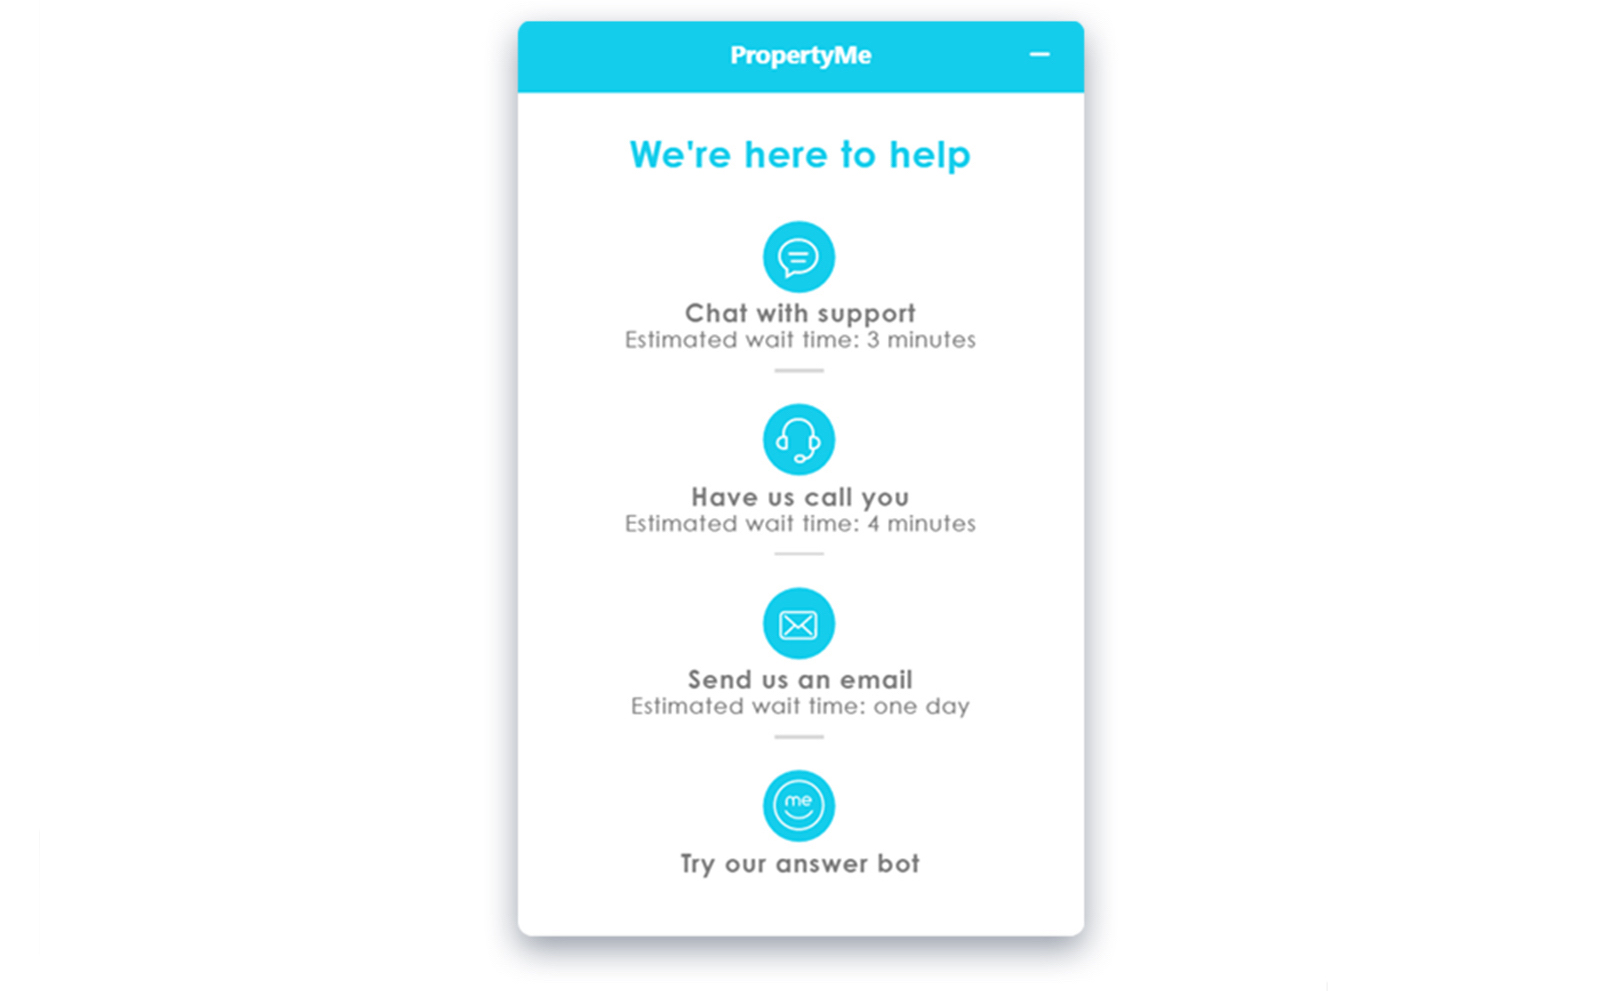 PropertyMe turns 7 answer bot support